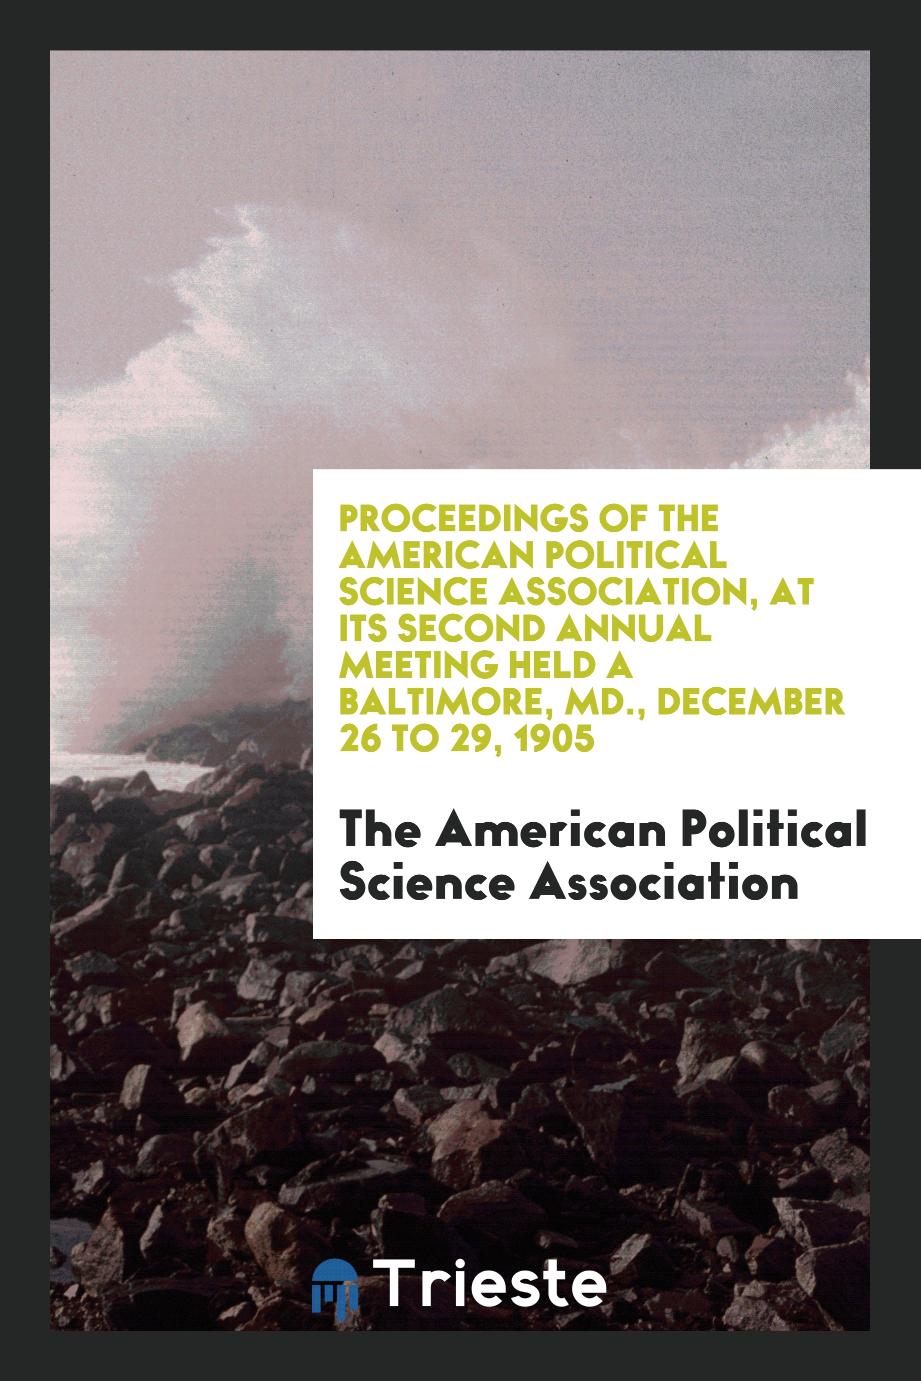 Proceedings of the American Political Science Association, at Its Second Annual Meeting Held a Baltimore, MD., December 26 to 29, 1905